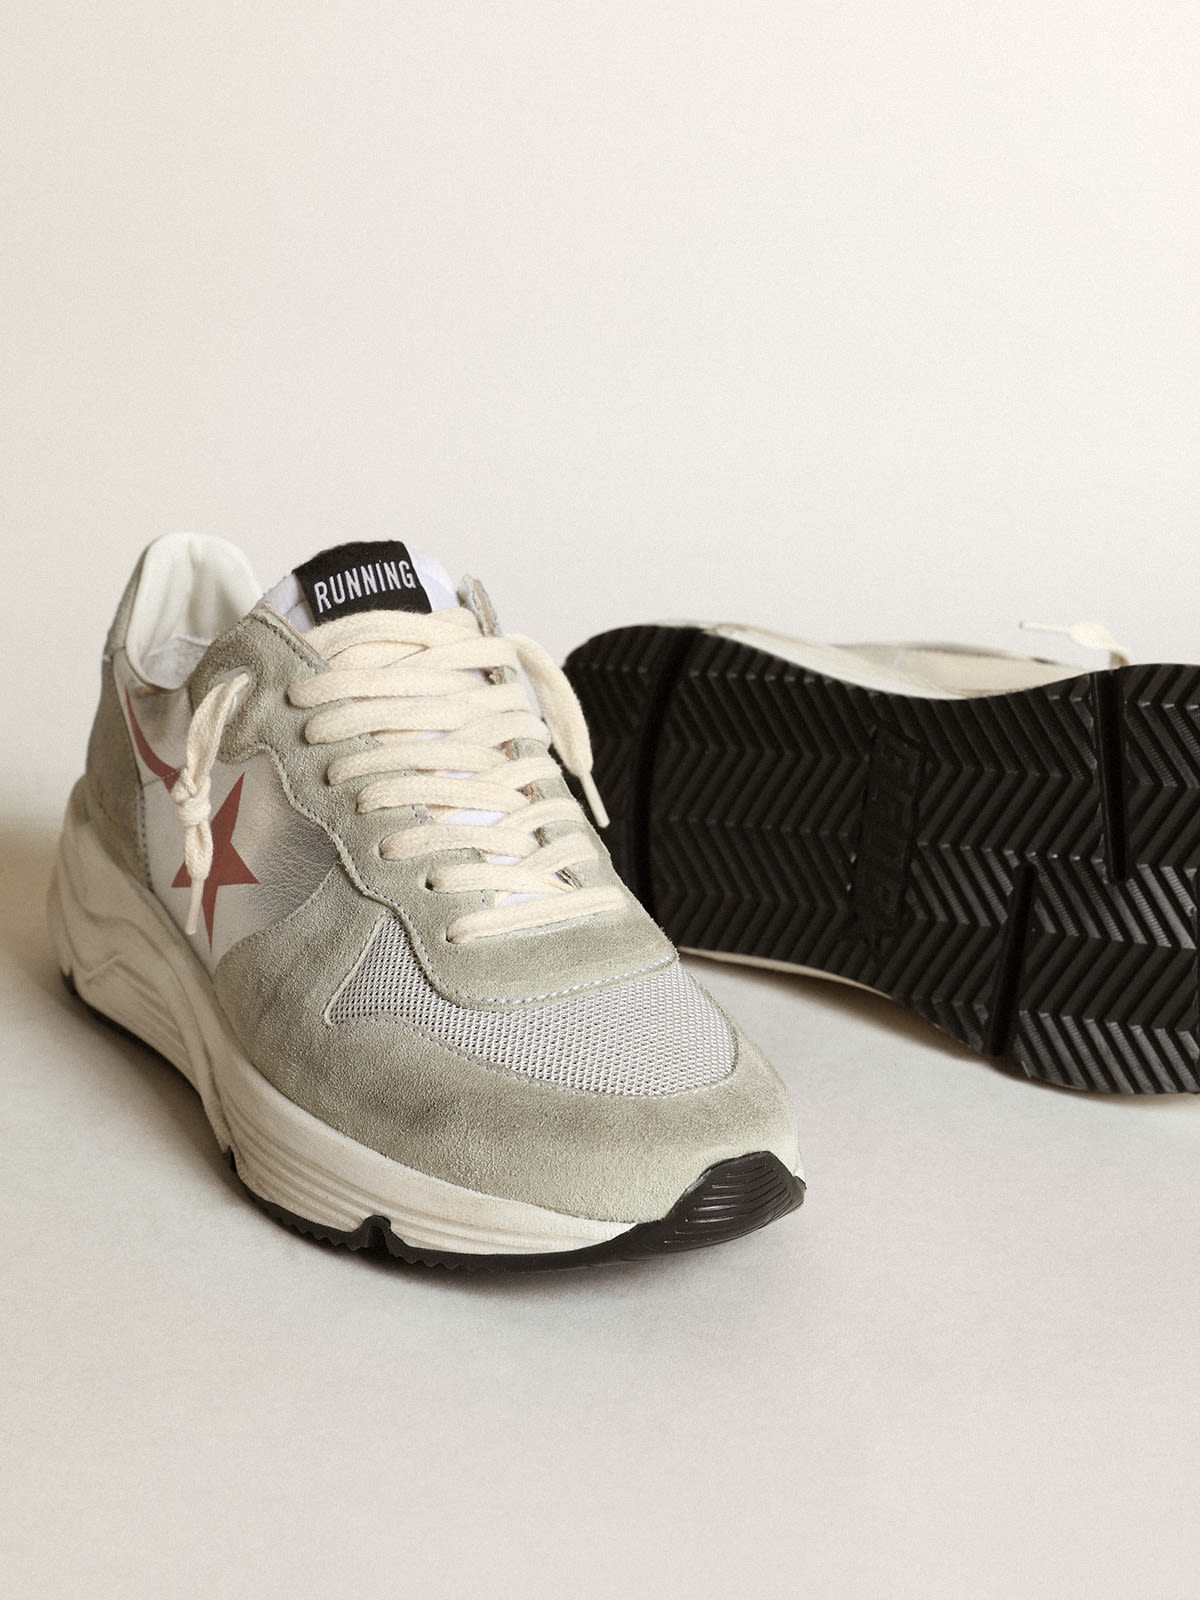 Golden Goose - Running Sole sneakers in silver laminated leather with ice-gray suede inserts in 